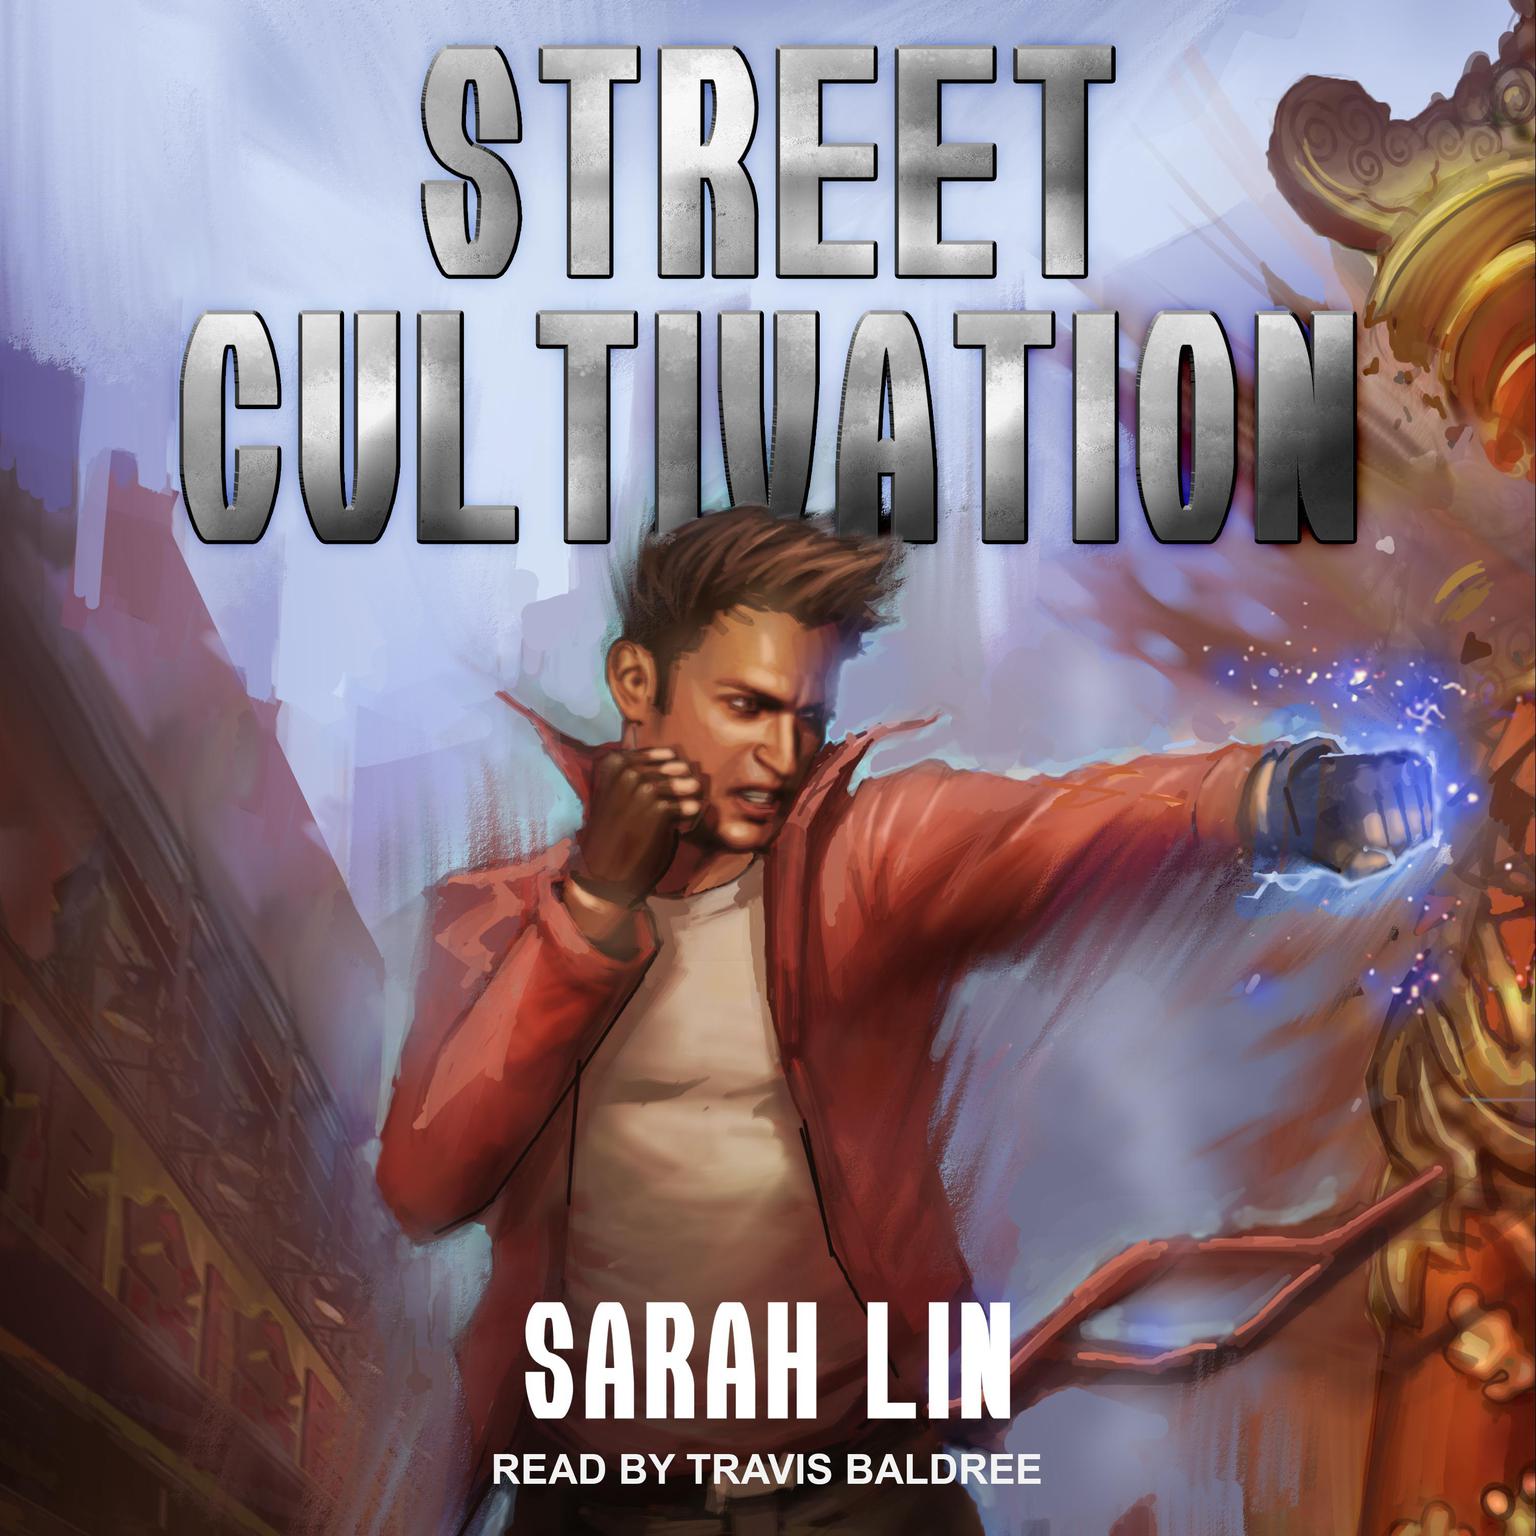 Street Cultivation Audiobook By Sarah Lin Download Now